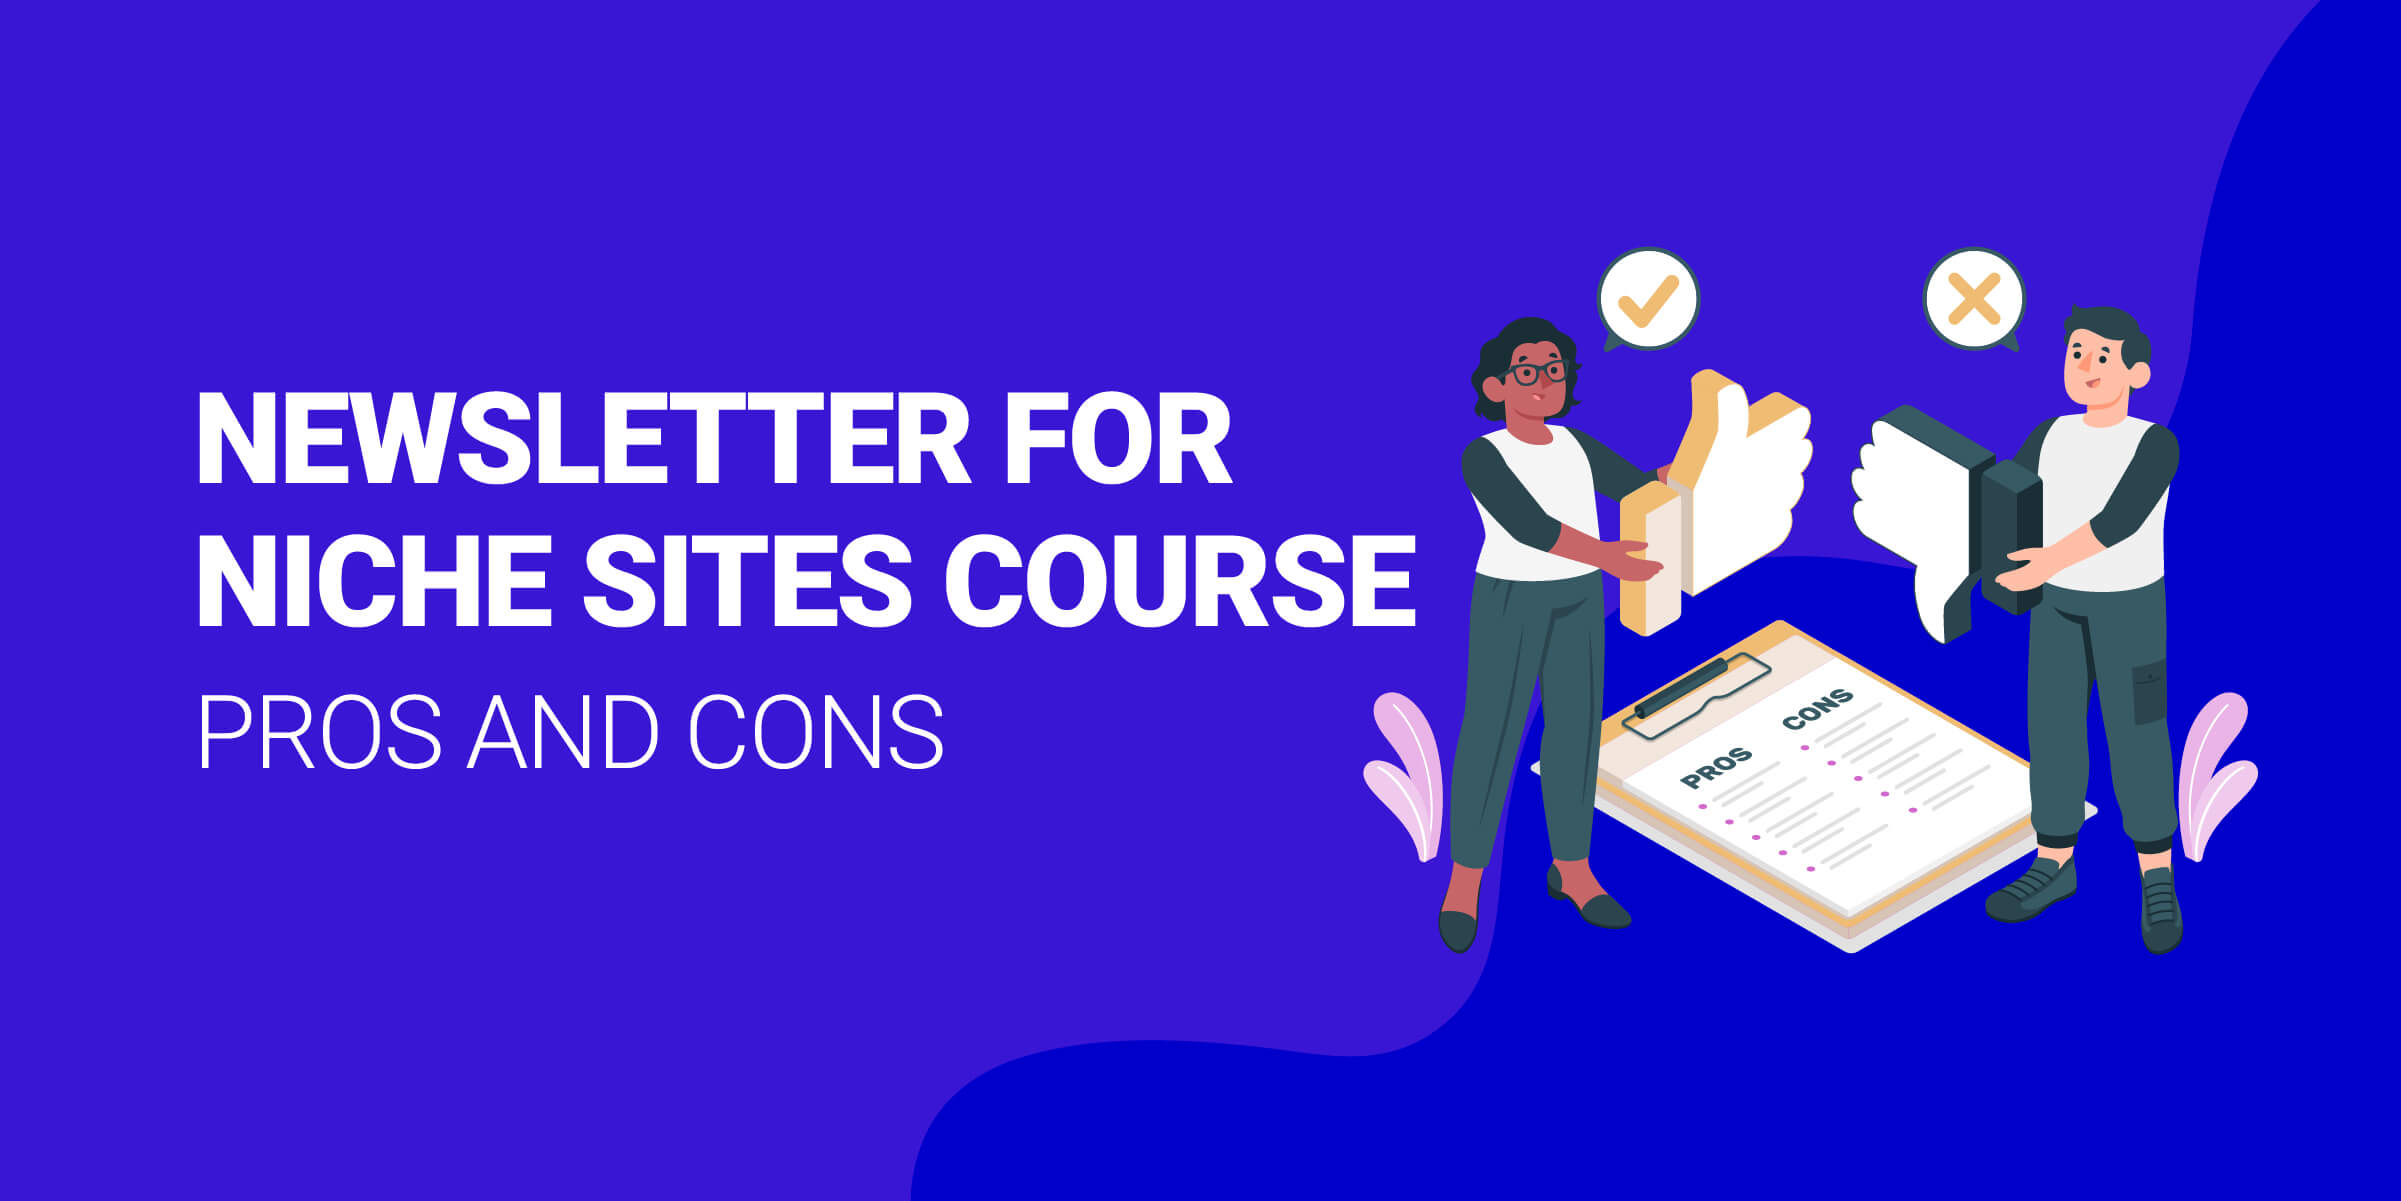 Newsletter for Niche Sites Pros and Cons